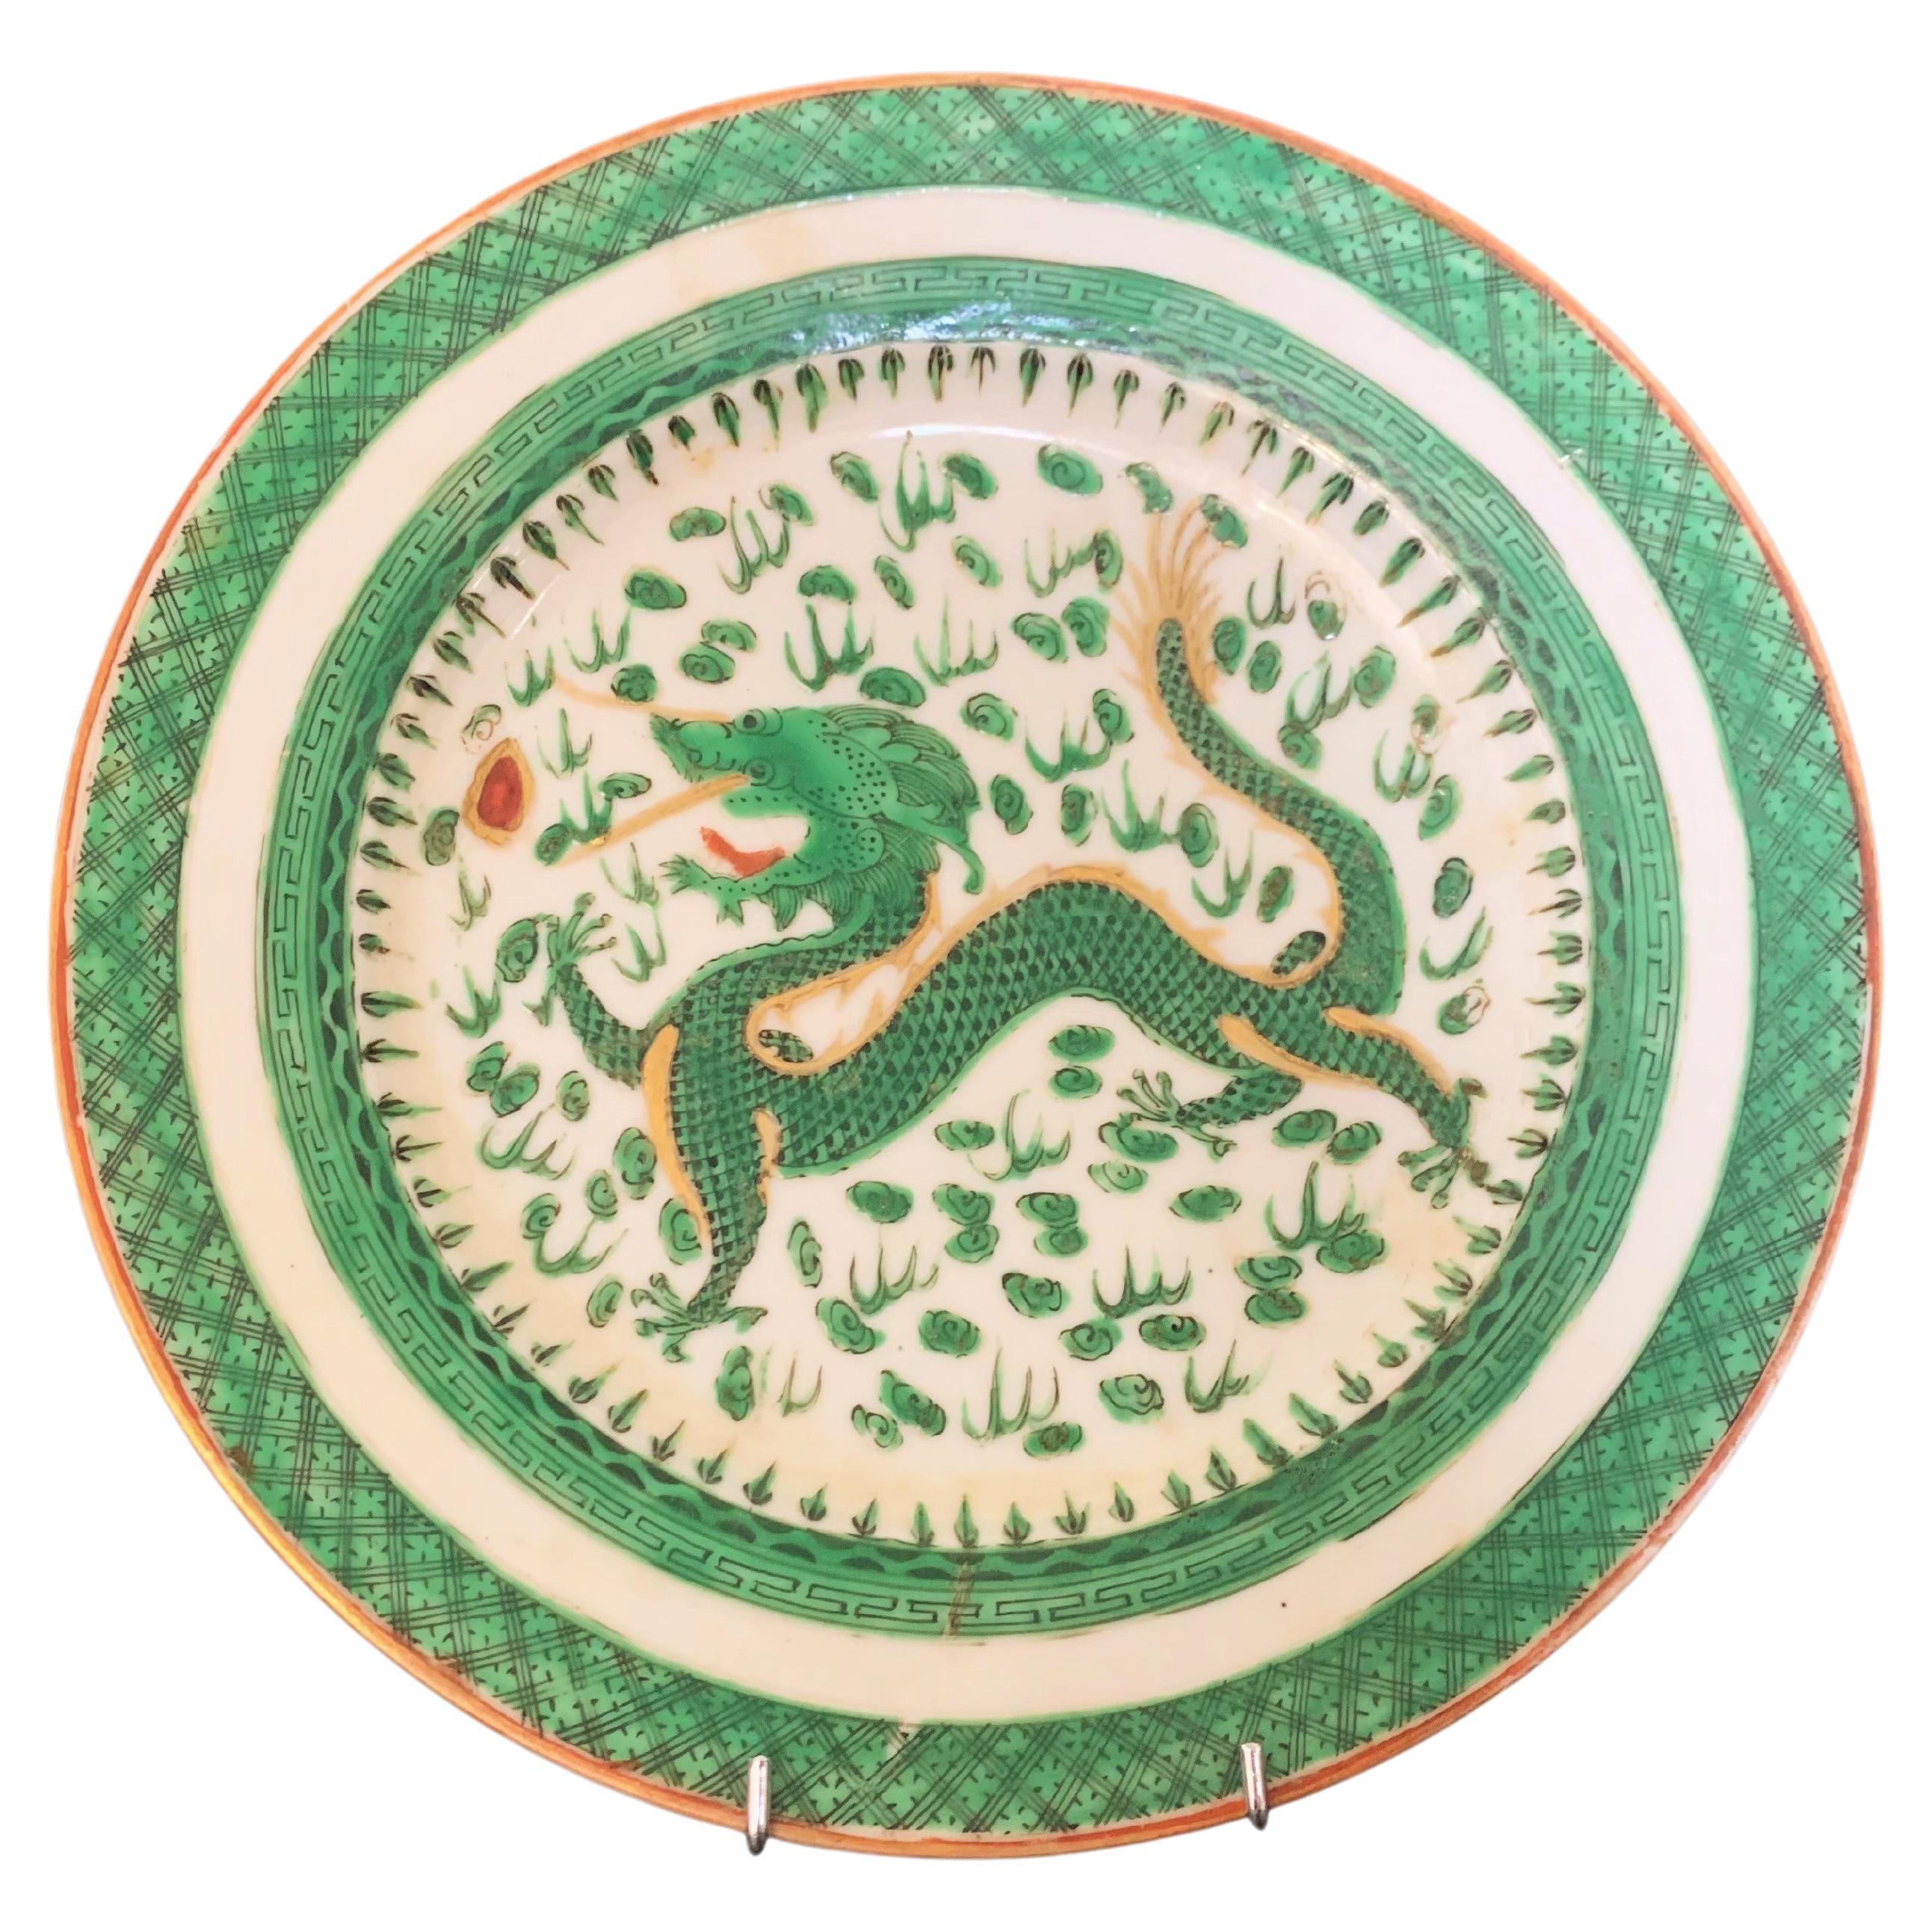 Chinese Porcelain Plate with Dragon Decoration "Famille Verte" 18th Century 